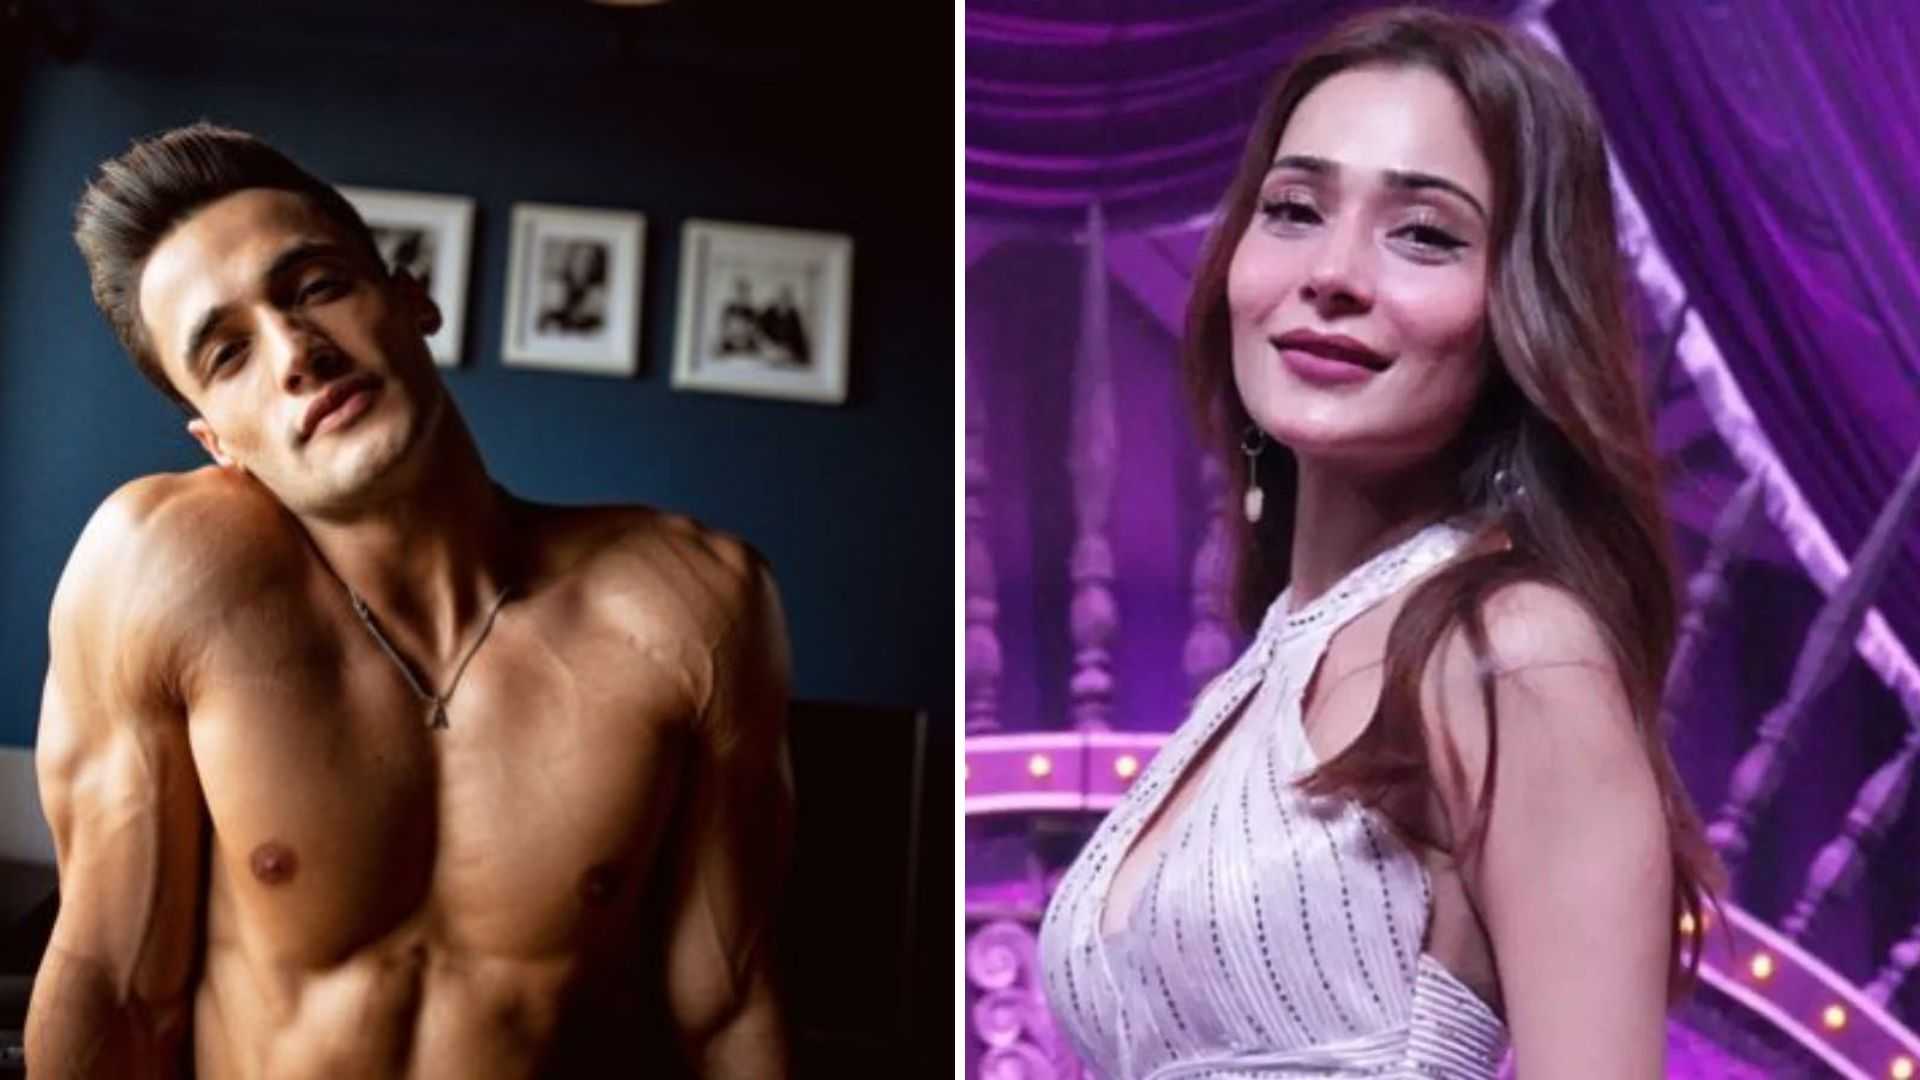 'Bigg Boss is not a scripted show' : Sara Khan slams Asim Riaz's latest statements on the reality show being rigged